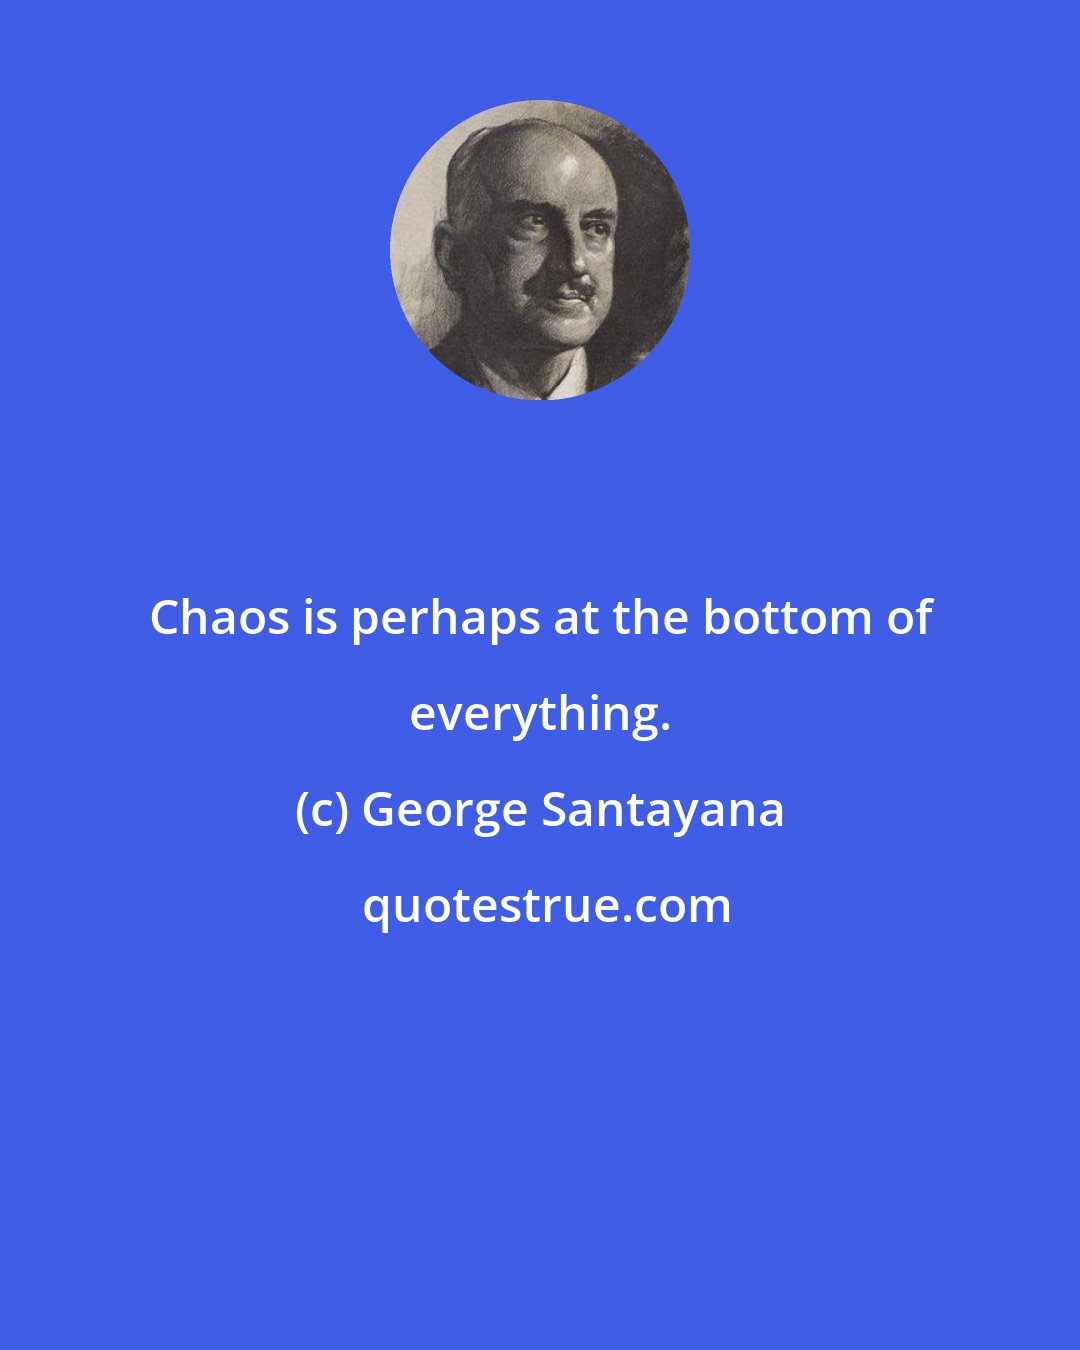 George Santayana: Chaos is perhaps at the bottom of everything.